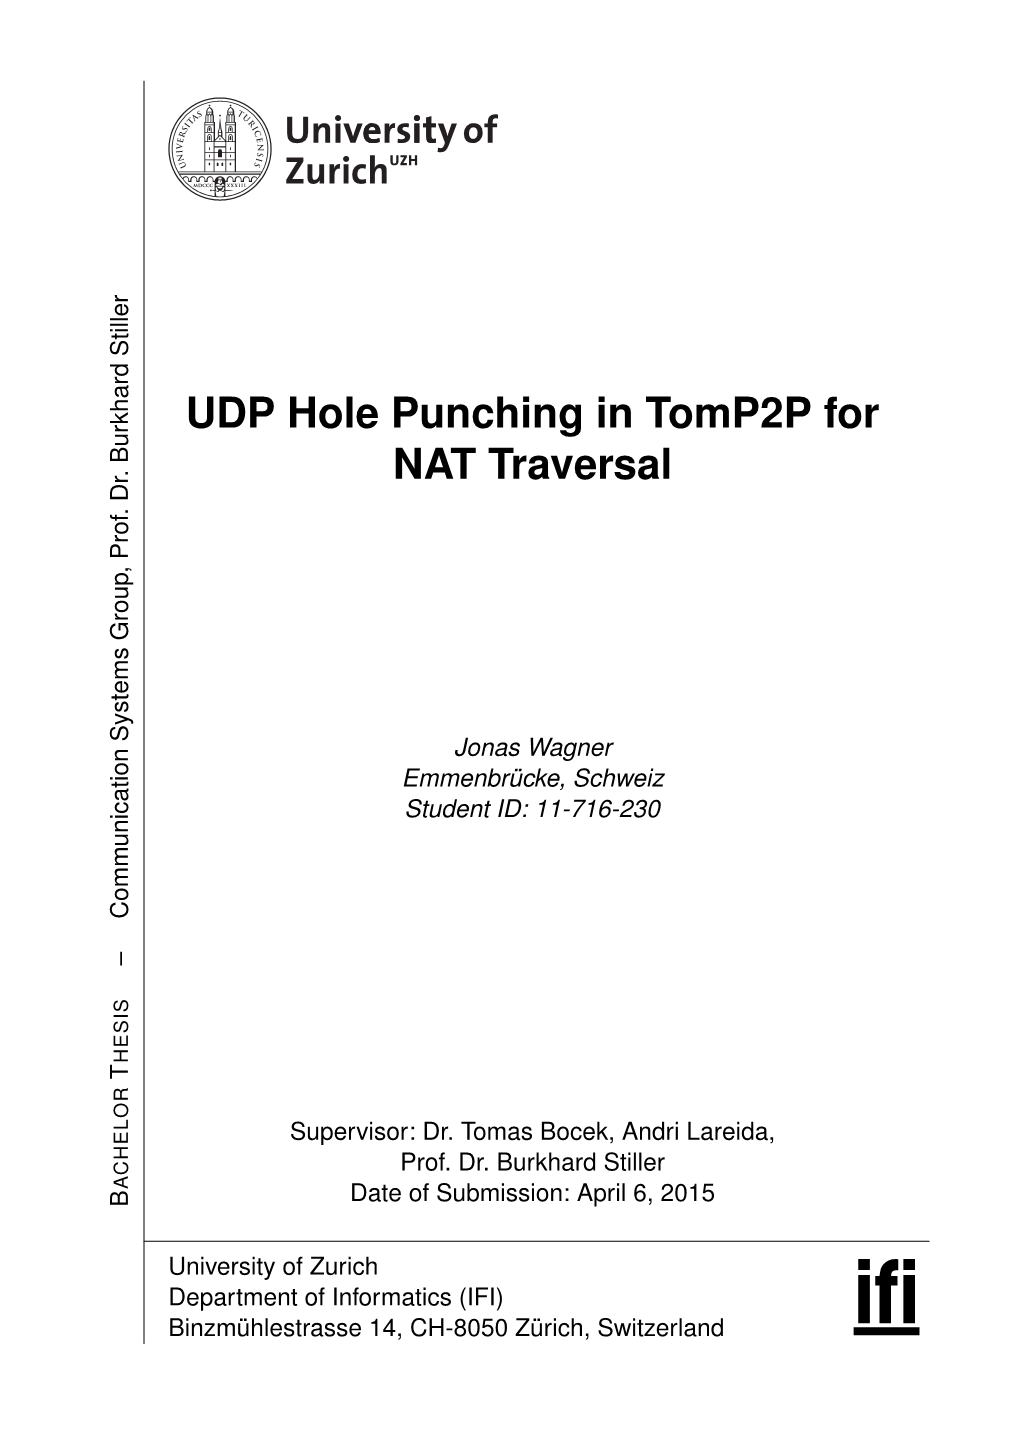 UDP Hole Punching in Tomp2p for NAT Traversal